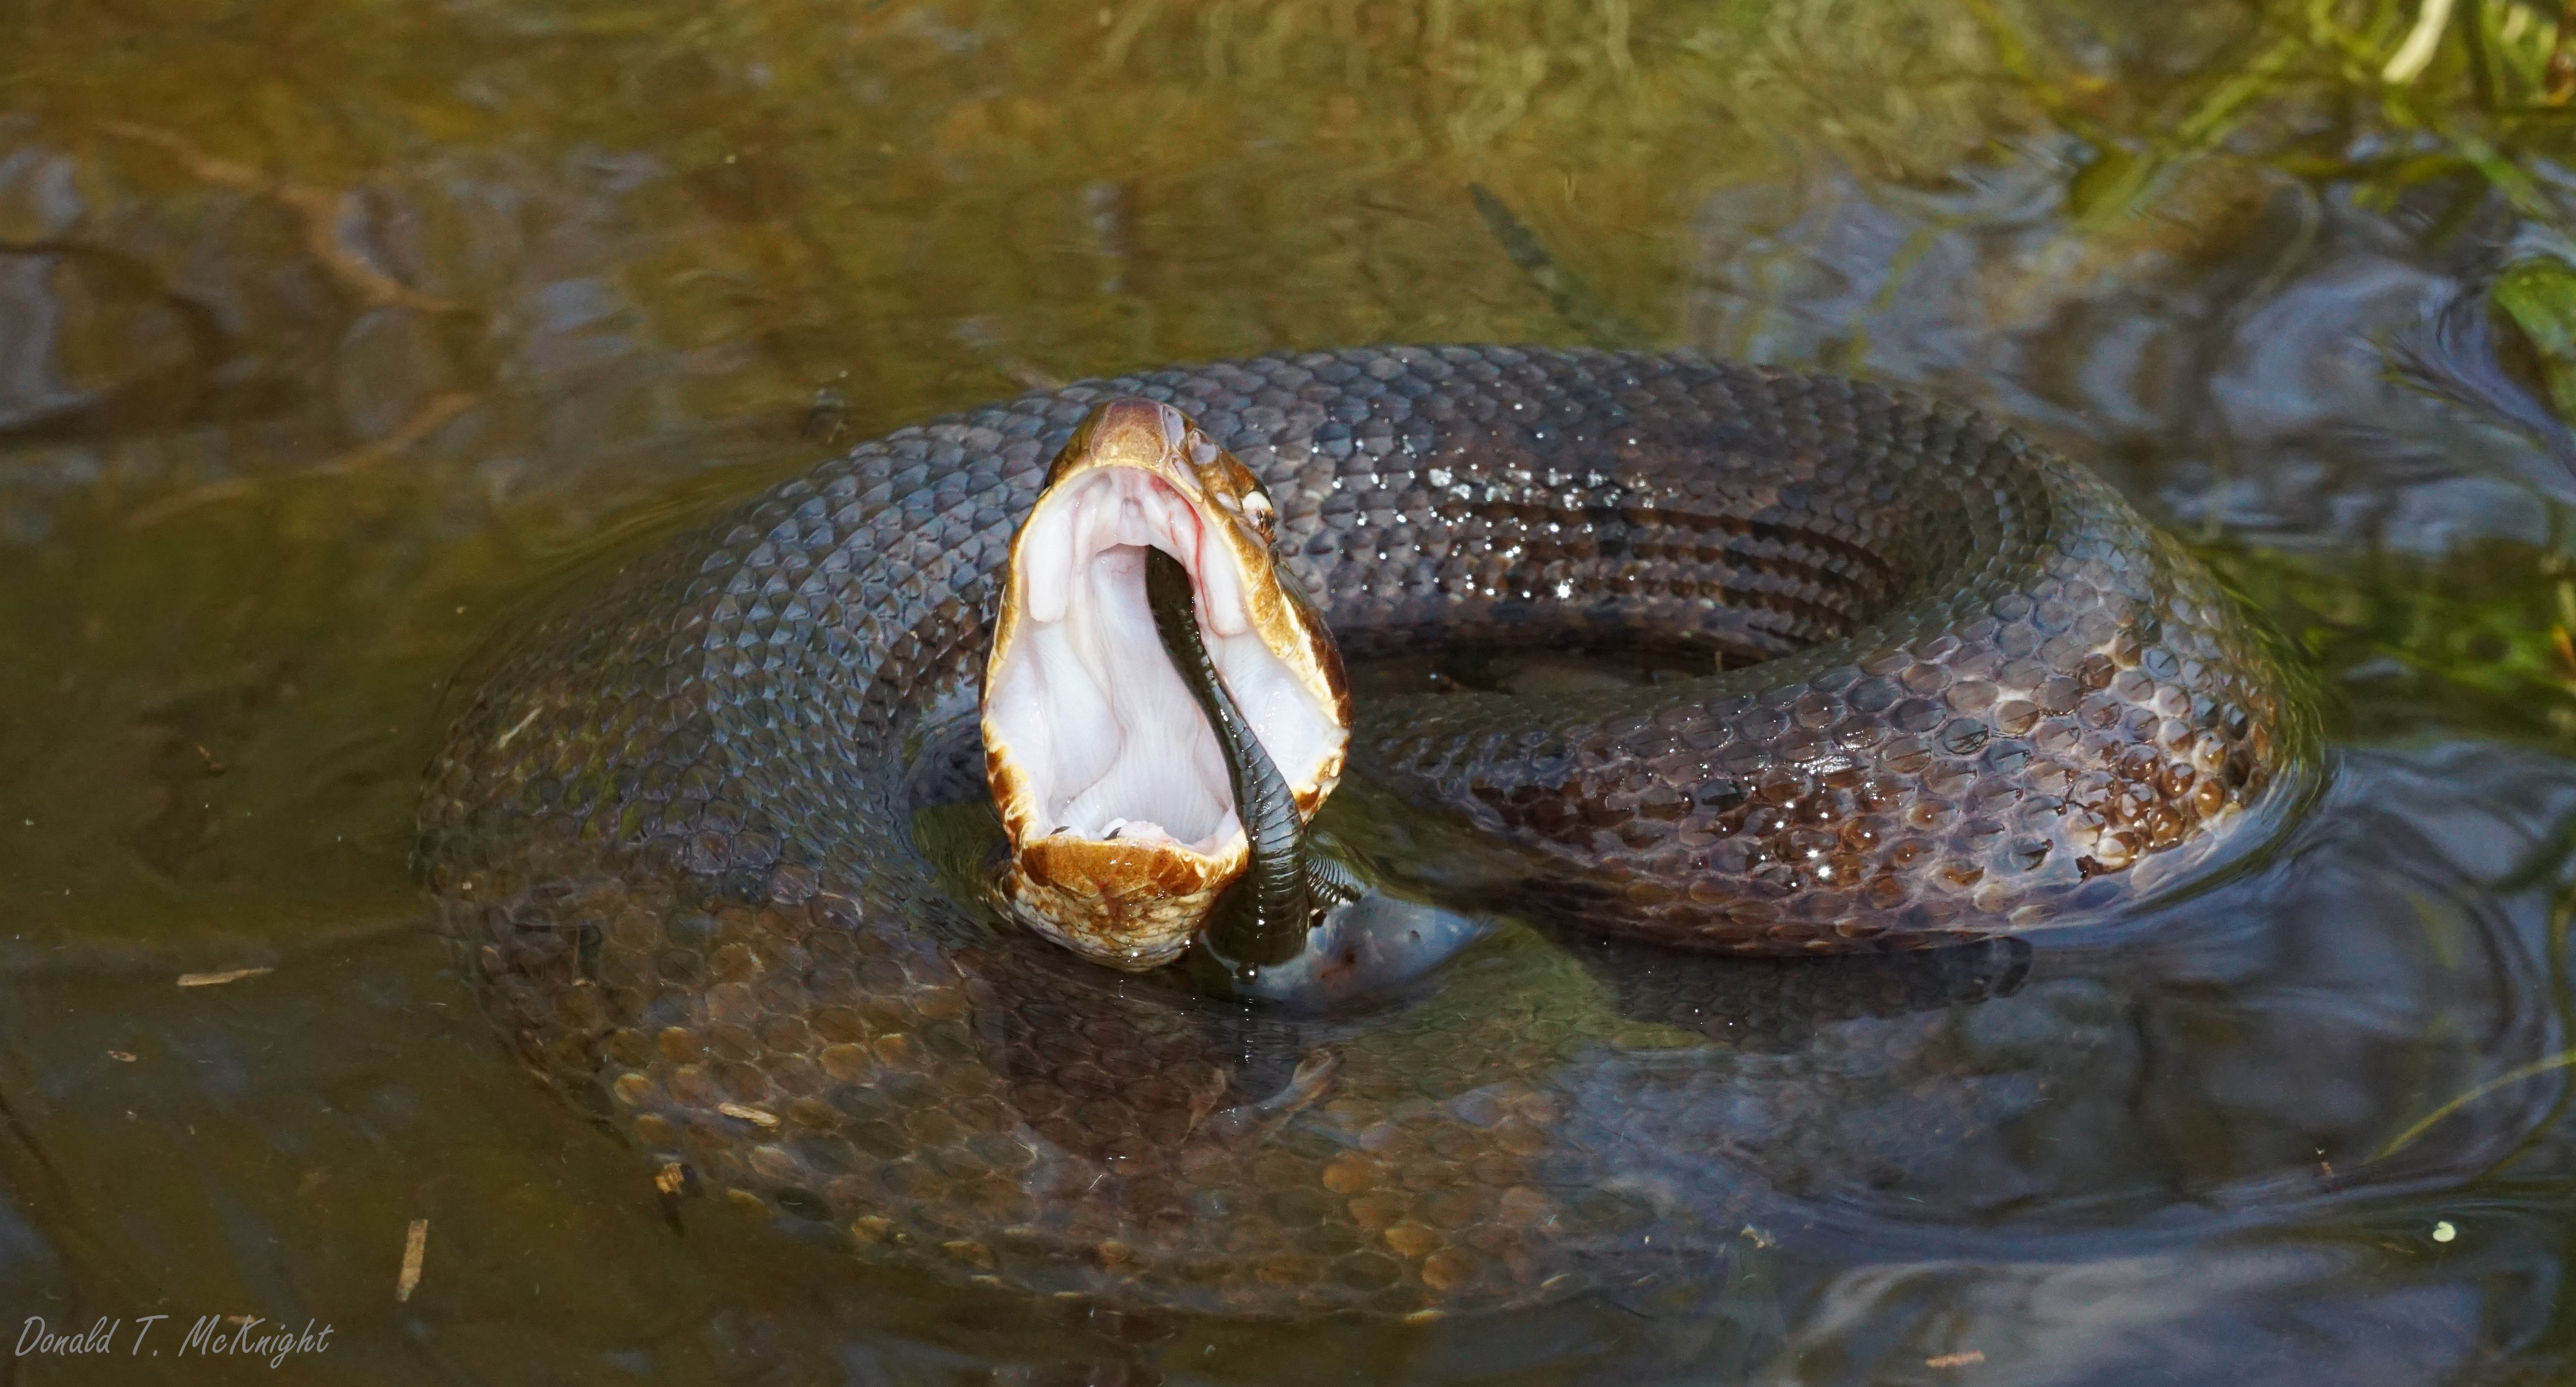 Donald McKnight on X: A few years ago, I found this cottonmouth with  massive leeches attached to it's mouth. I frequently see these leeches on  #turtles but have never seen them on #